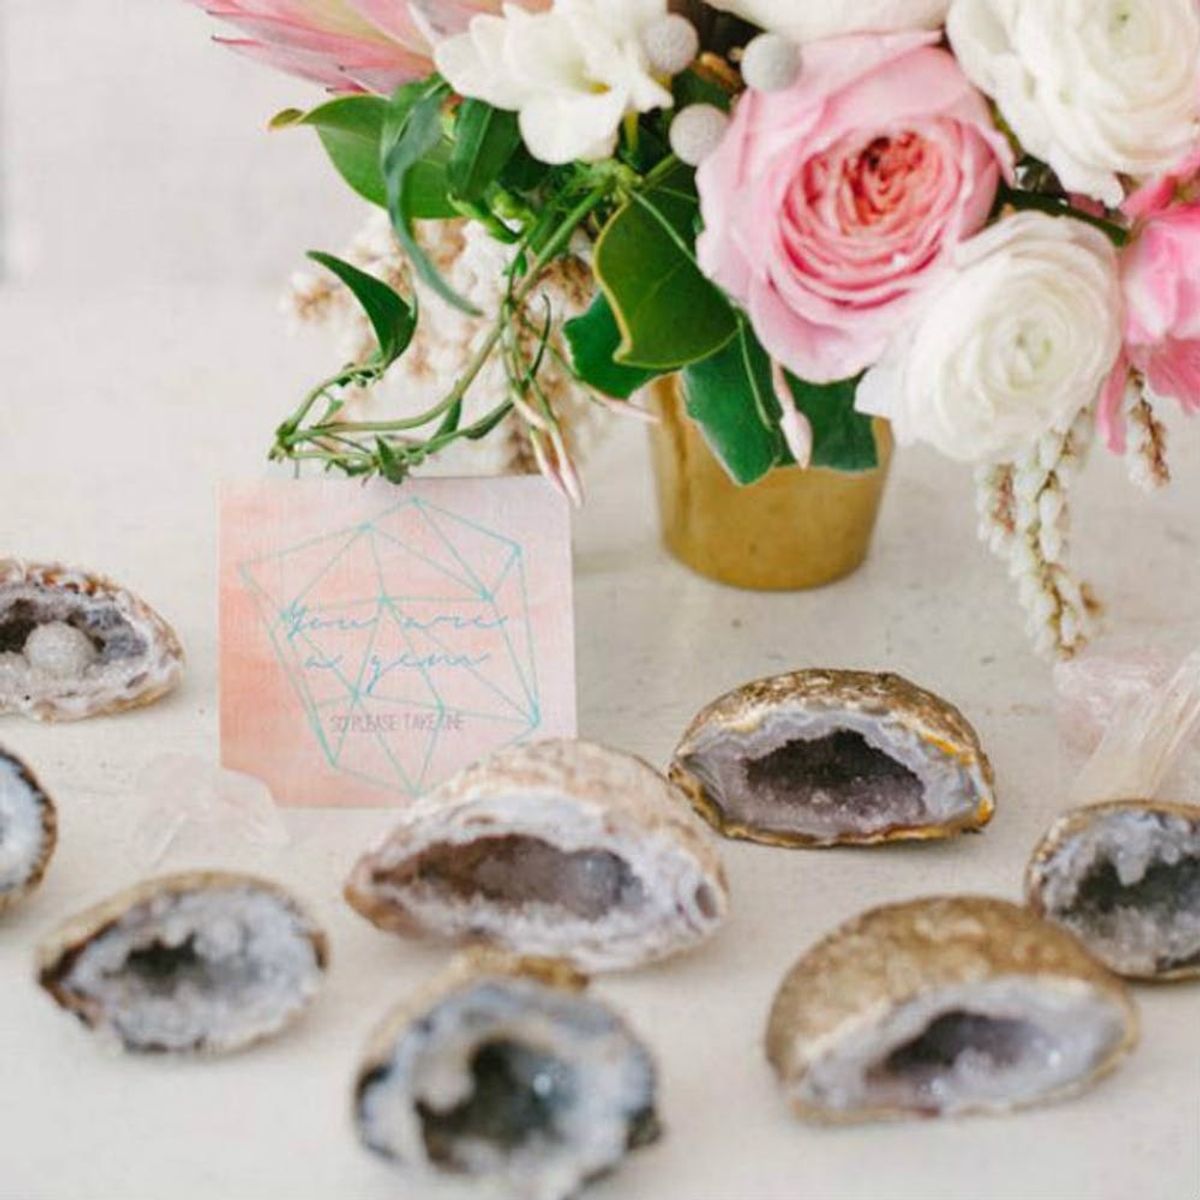 16 Gorgeous Bridal Shower Favors to Send Your Guests Home Happy